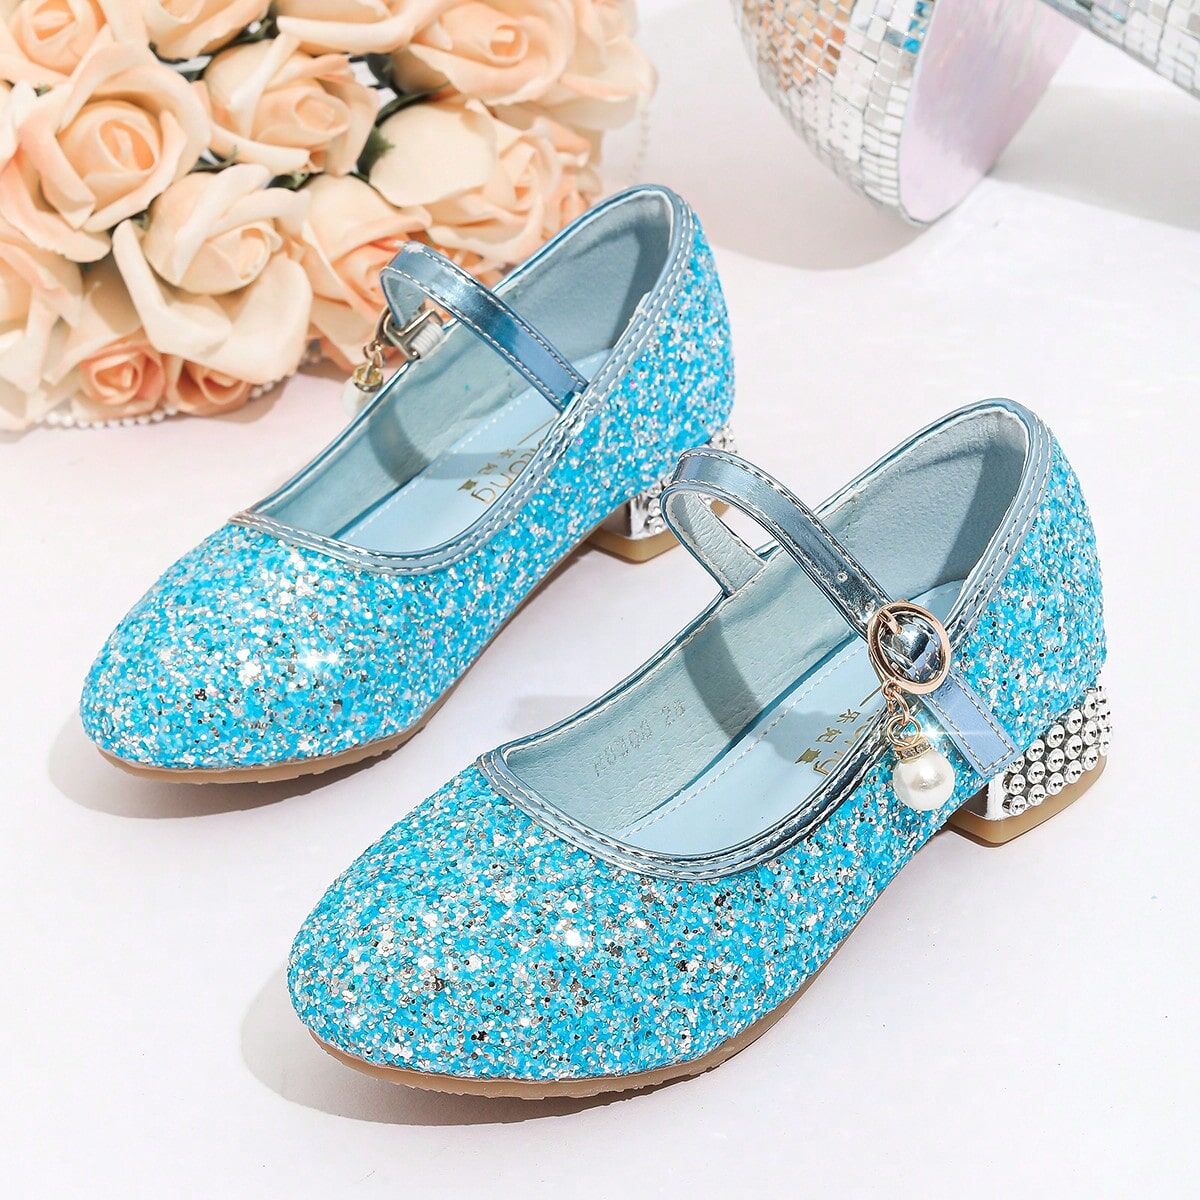 SHEIN Children's Flat Shoes, Comfortable And Fashionable Princess Shoes For Outdoor Activities Blue EUR34,EUR35,EUR36,EUR37,EUR27,EUR28,EUR29,EUR30,EUR31,EUR32,EUR33